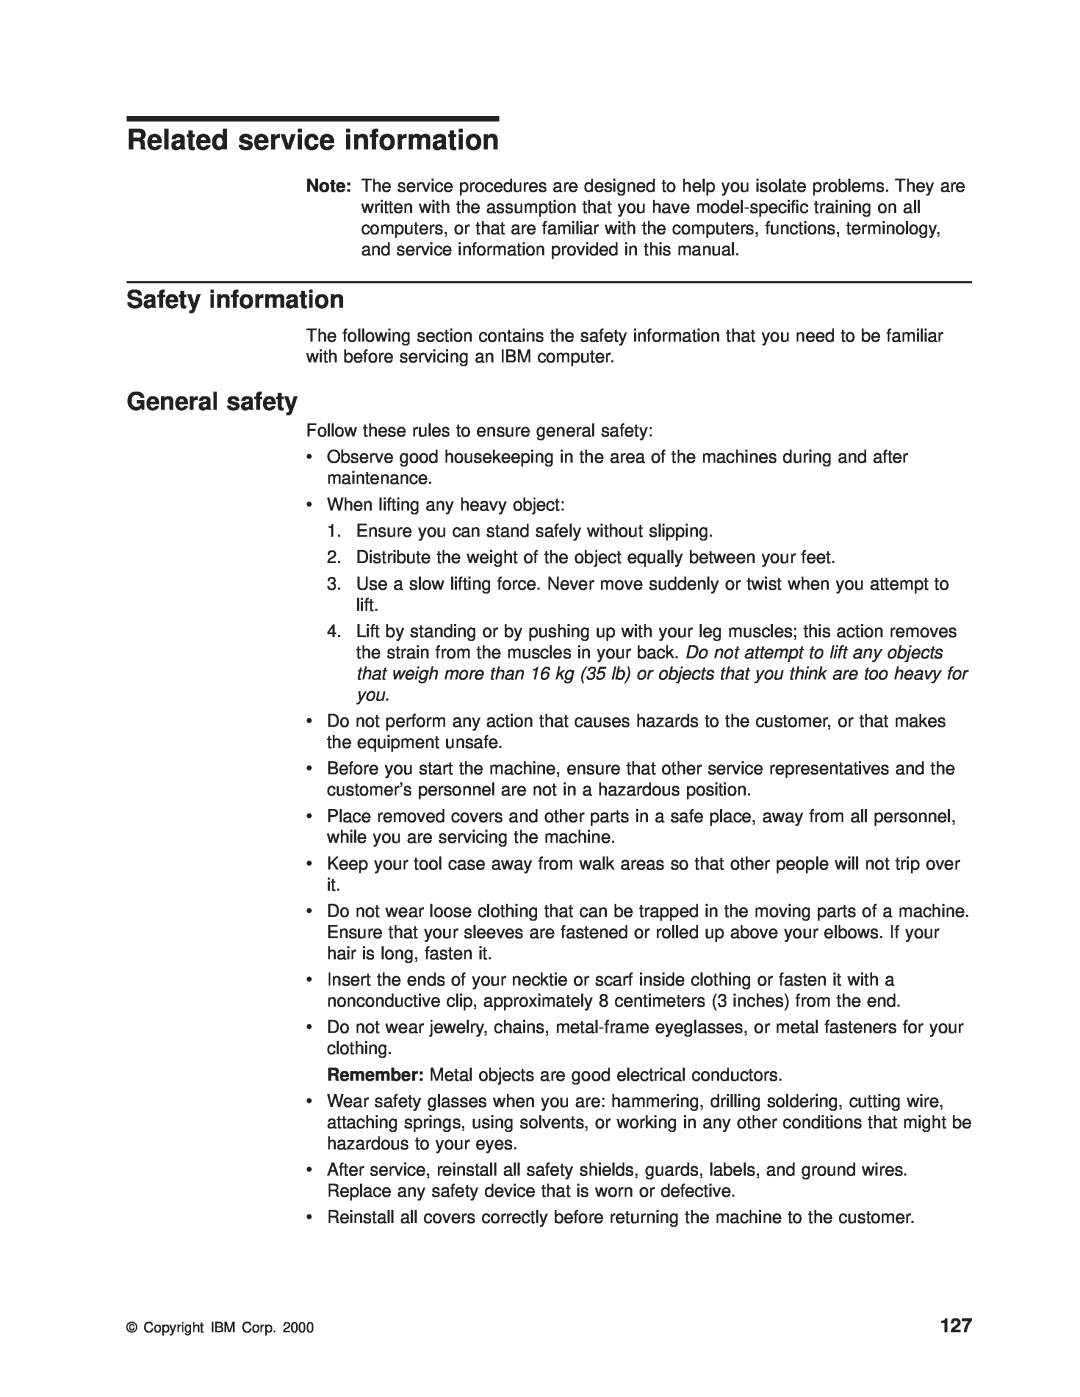 IBM 8682 manual Related service information, Safety information, General safety 